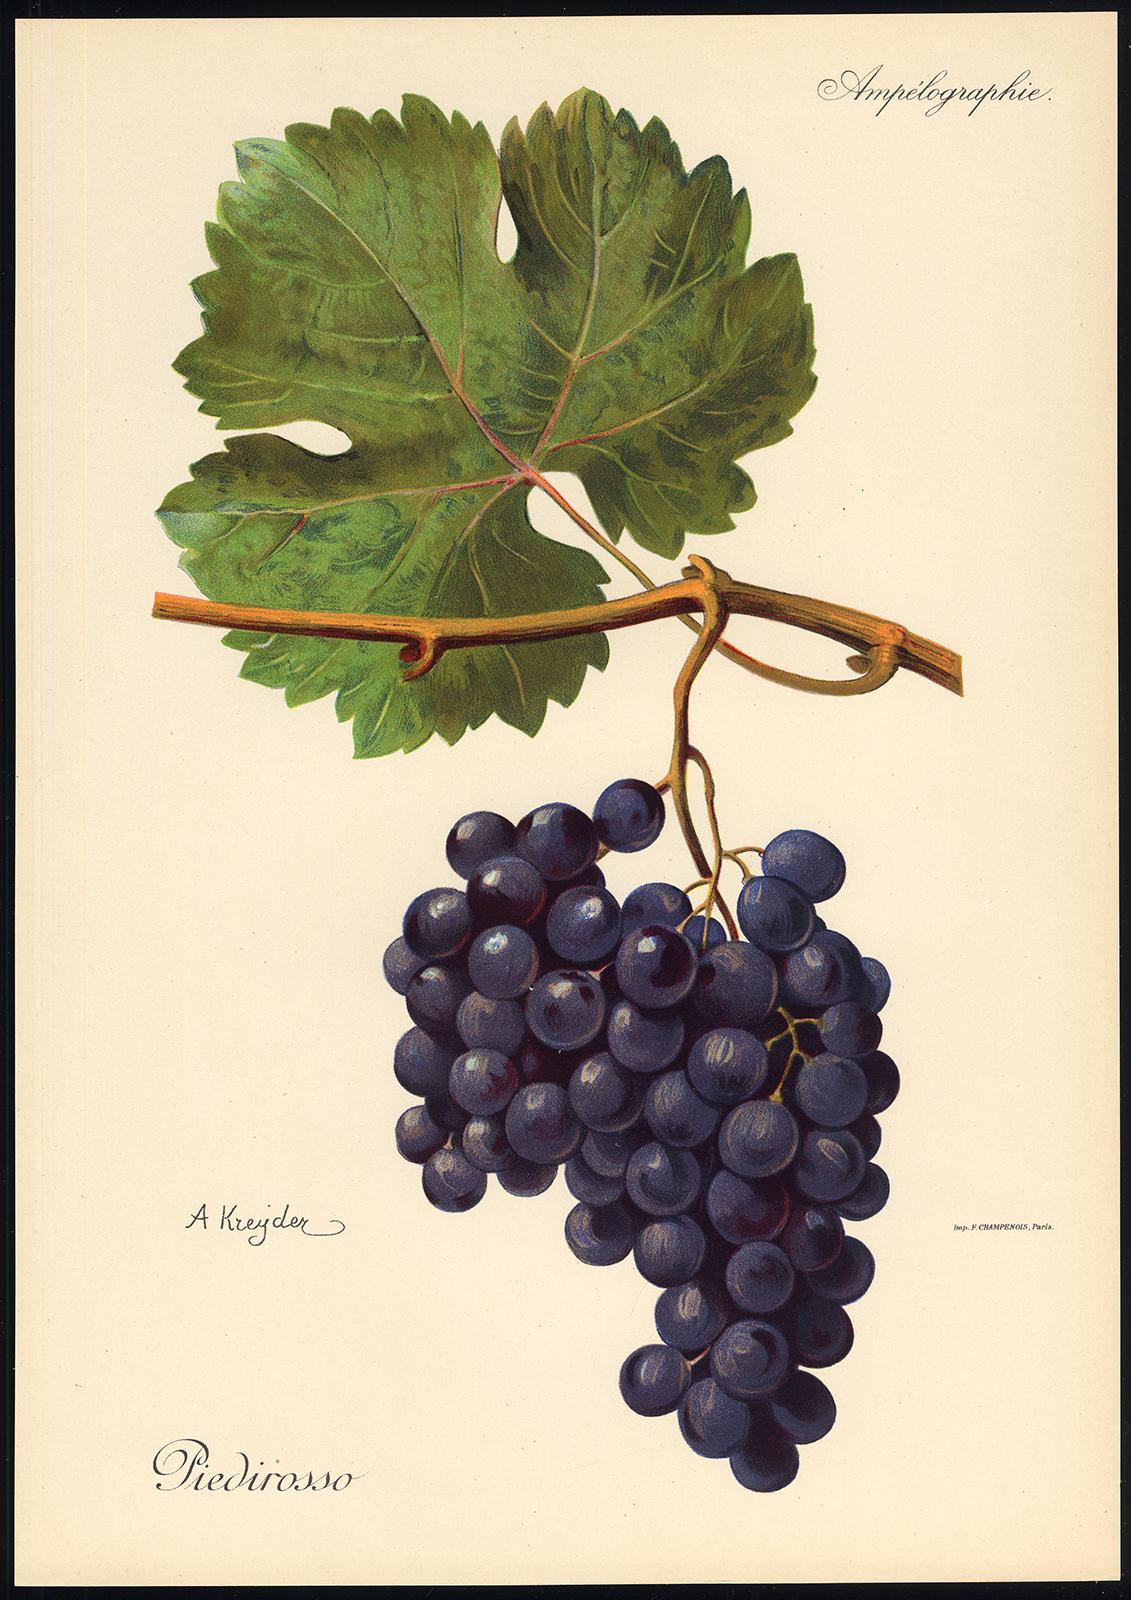 The Piedirosso grape - from Ampelography by Vermorel - Lithograph - Early 20th c - Print by Victor Vermorel